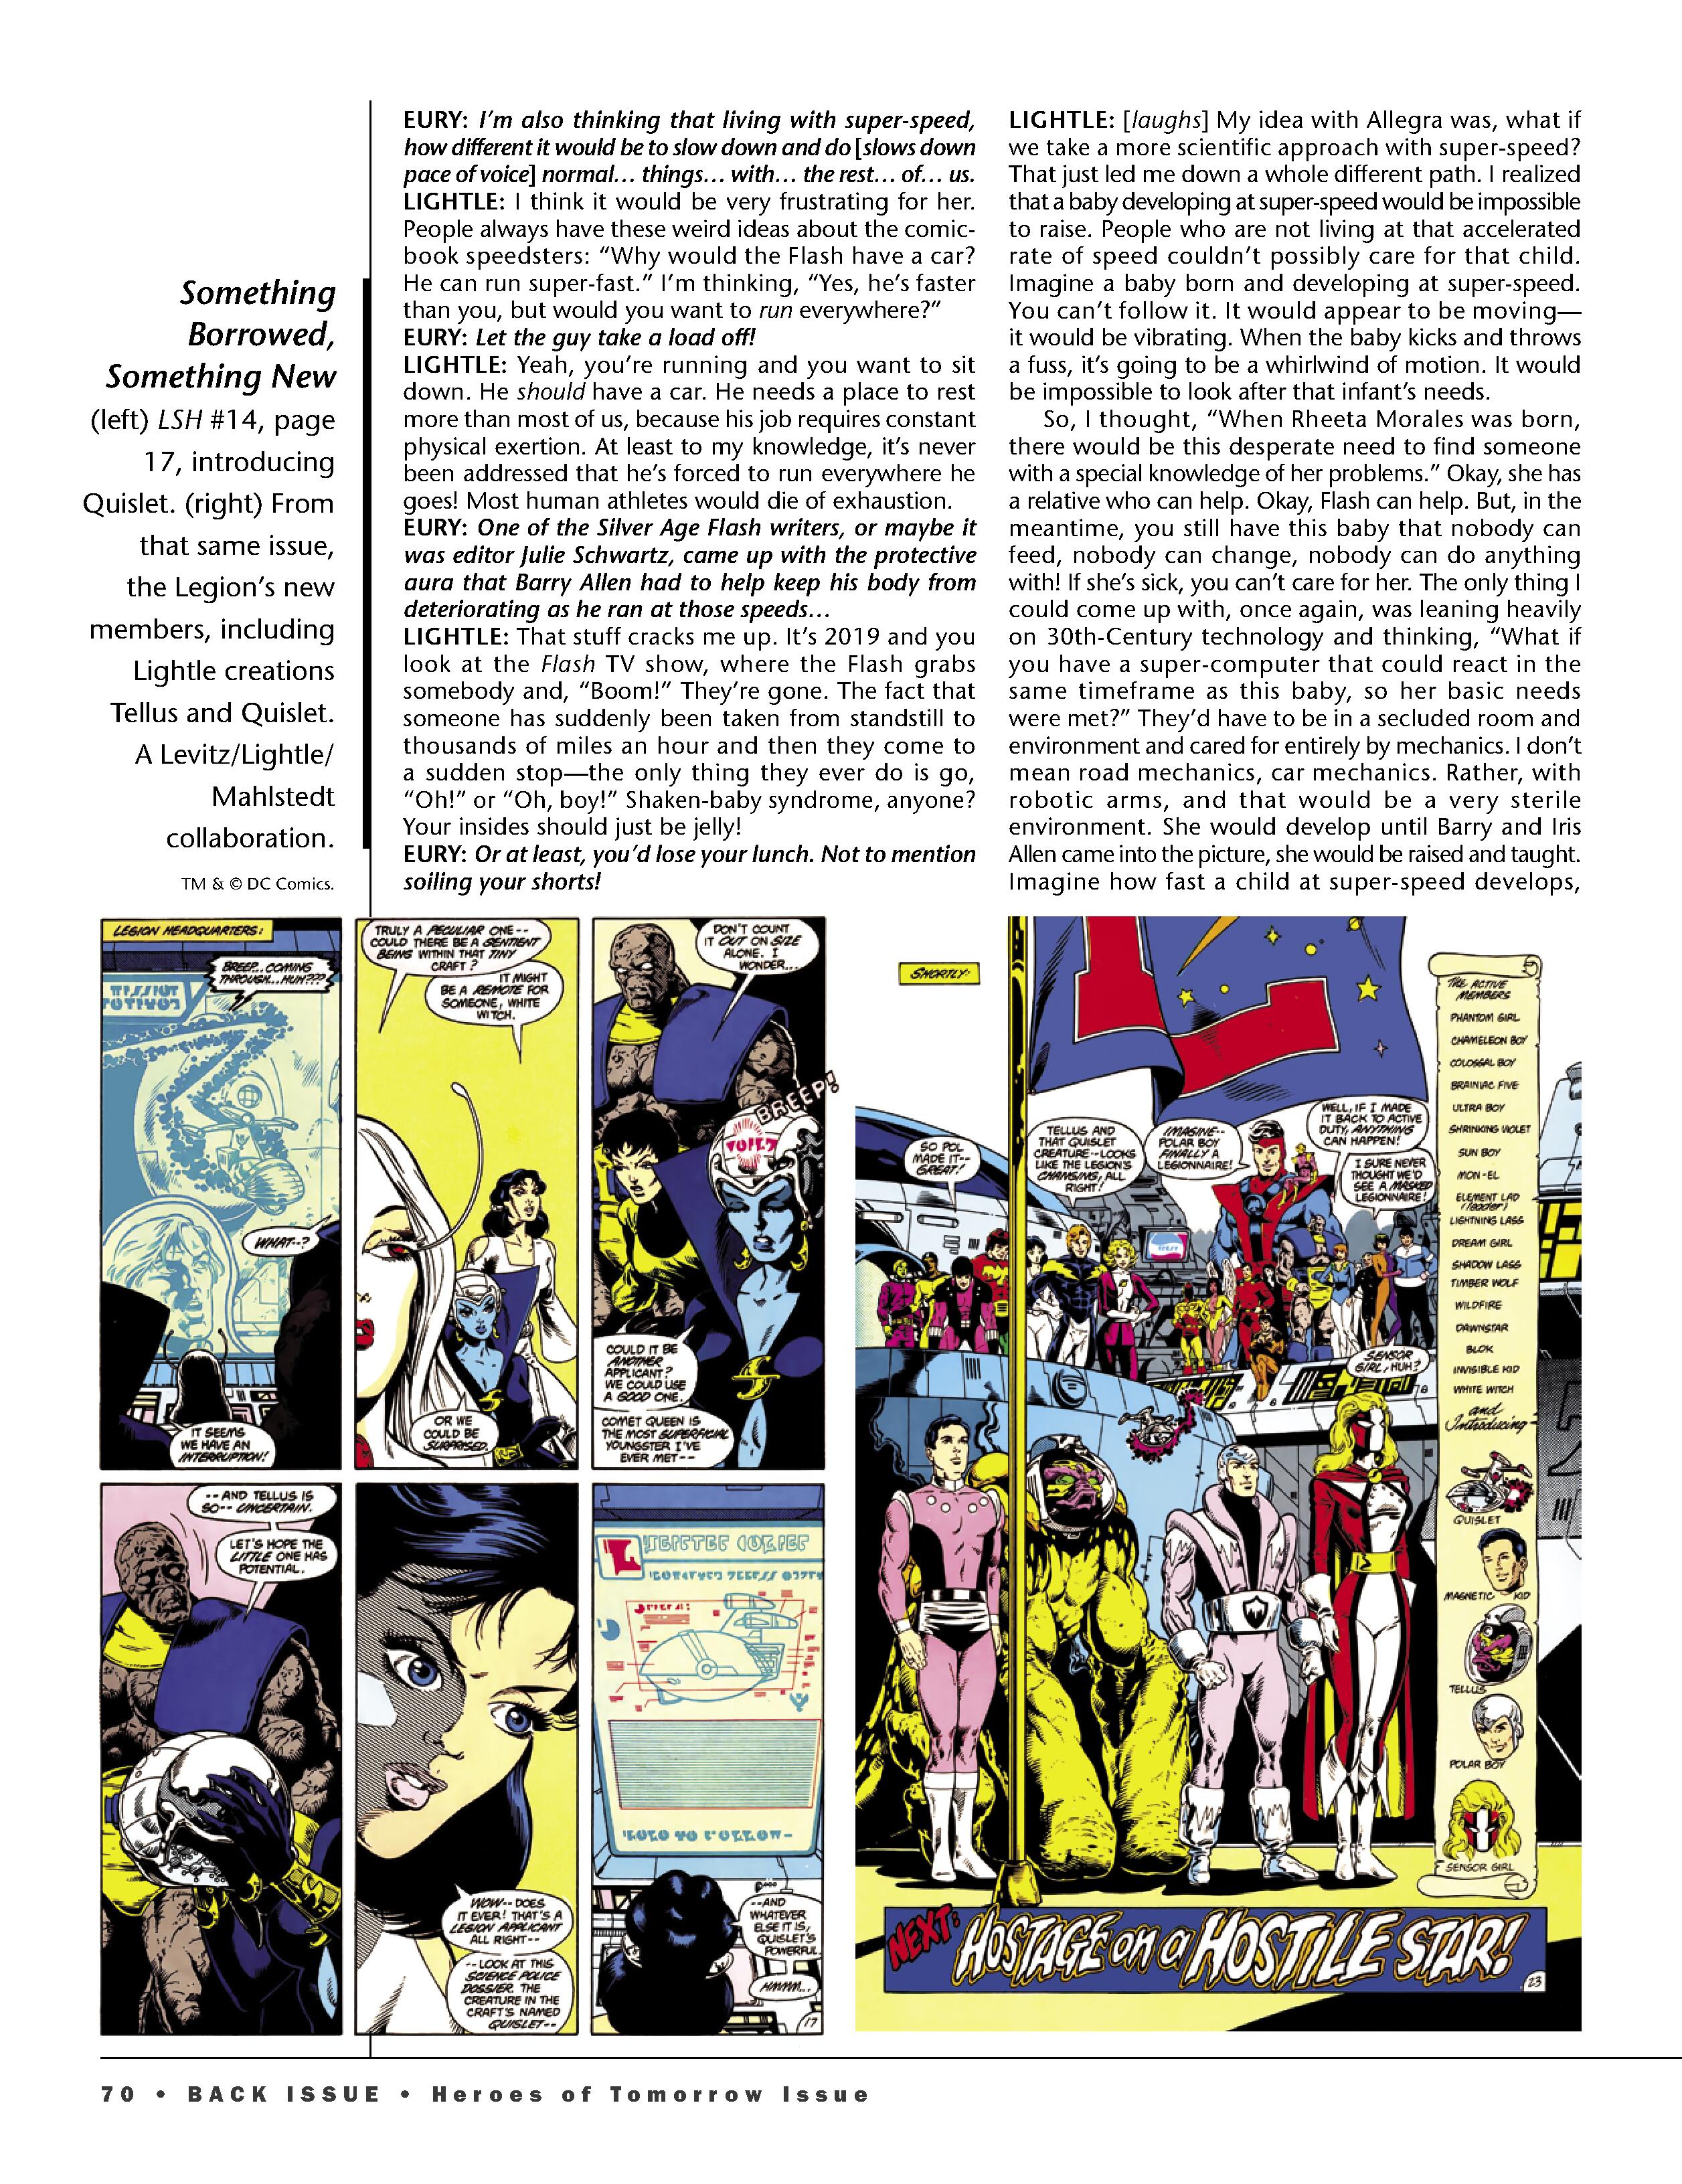 Read online Back Issue comic -  Issue #120 - 72